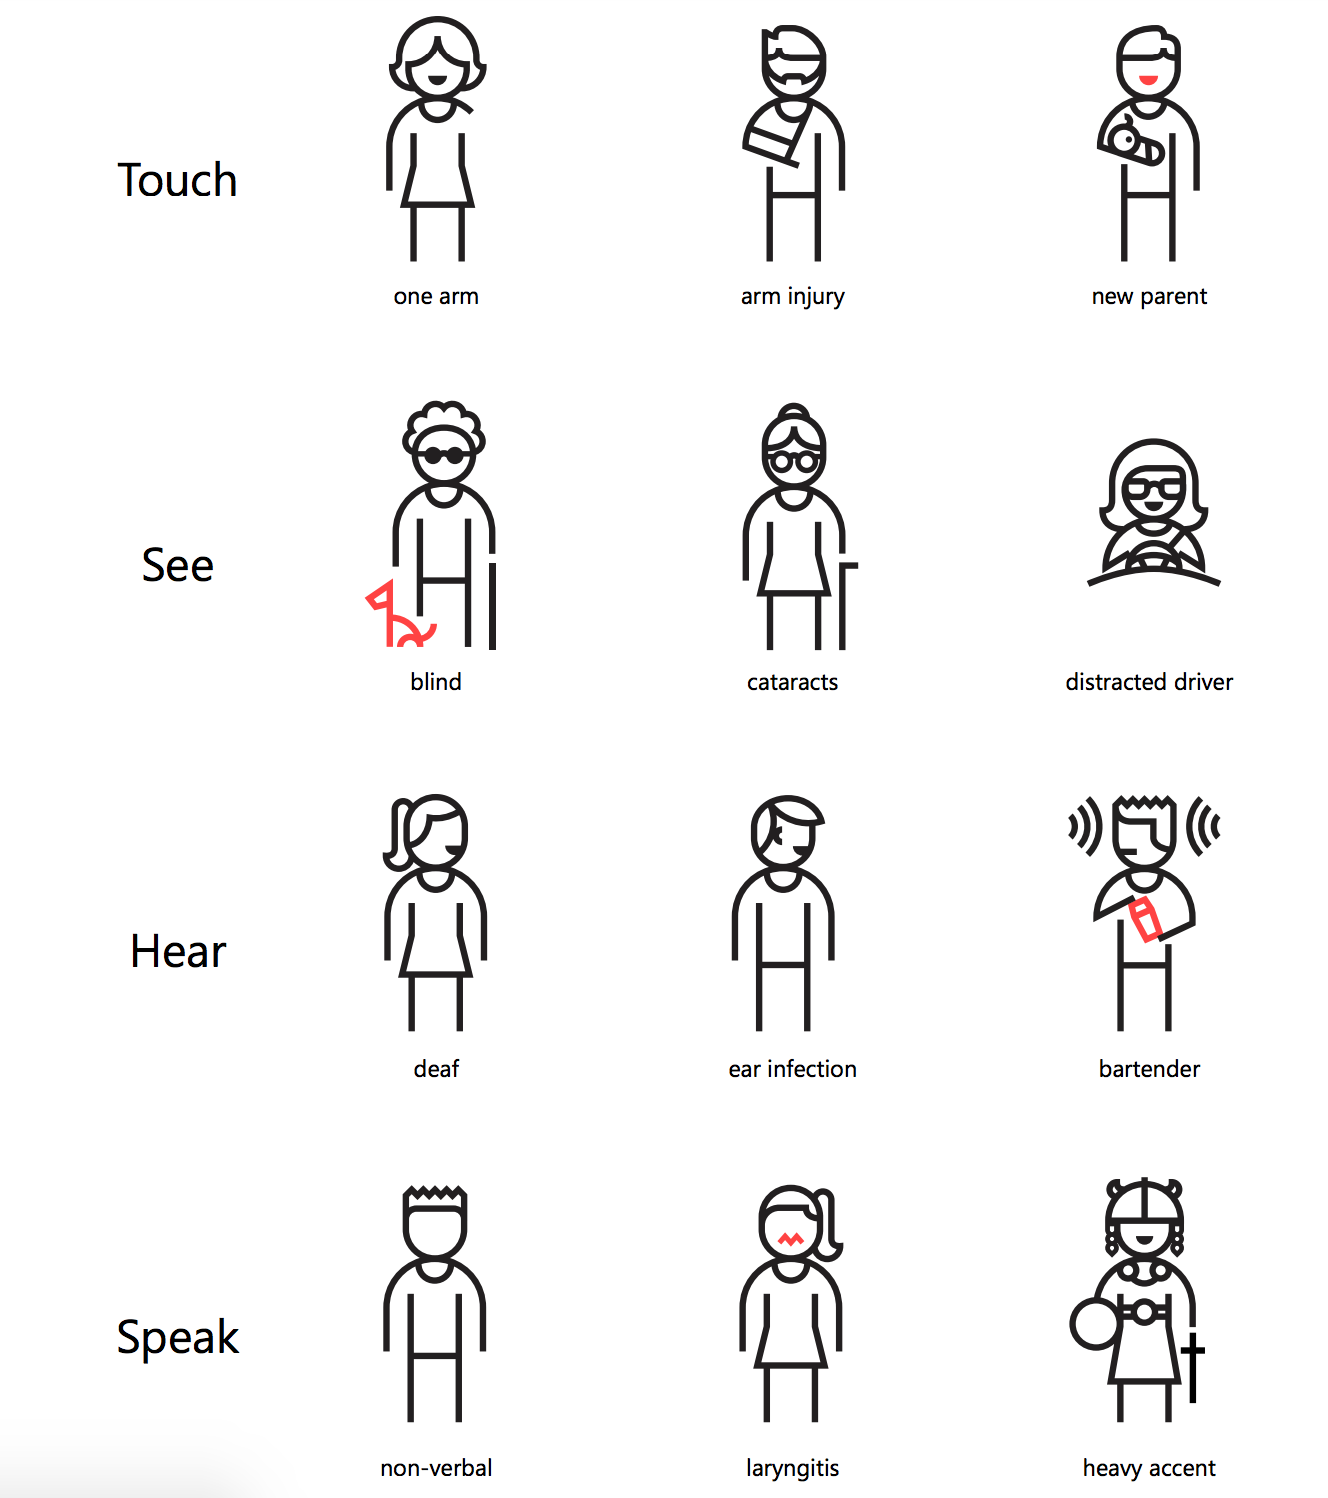 How four categories of impairments (touch, see, hear, and speak) apply to users in mild, moderate, and severe instances.